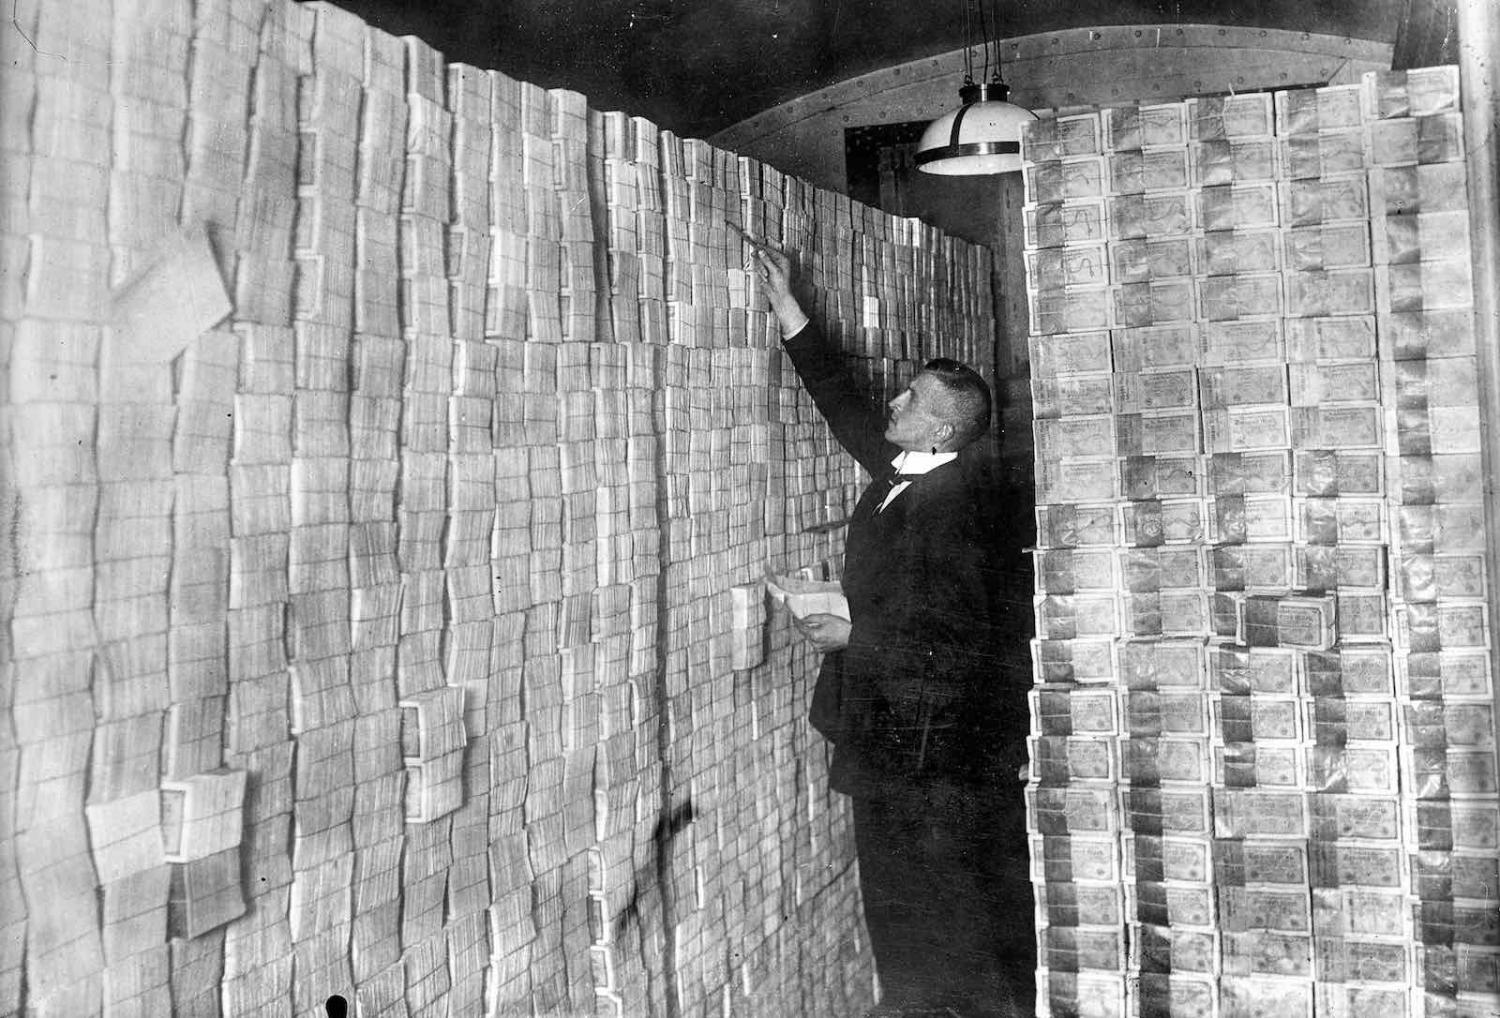 A basement of a bank full of banknotes in Weimar Republic days (Photo: Albert Harlingue/Roger Viollet via Getty Images)